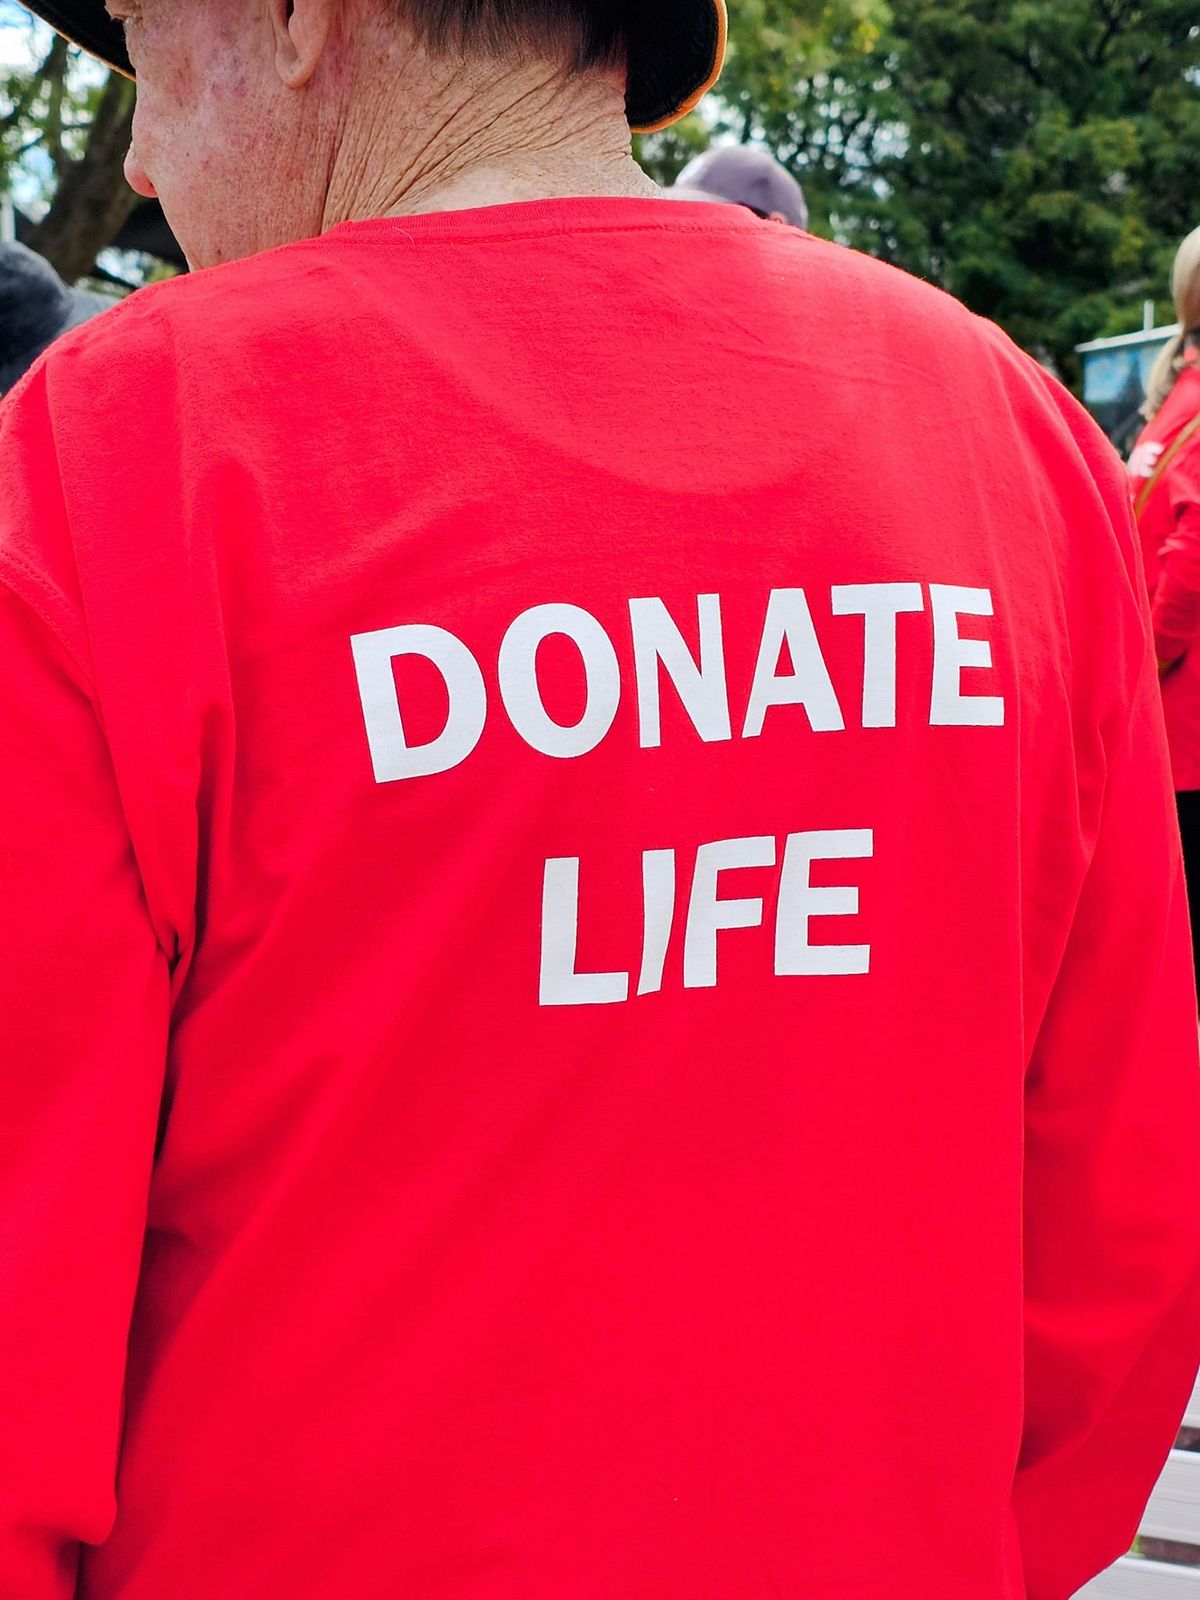 Donate Life Day